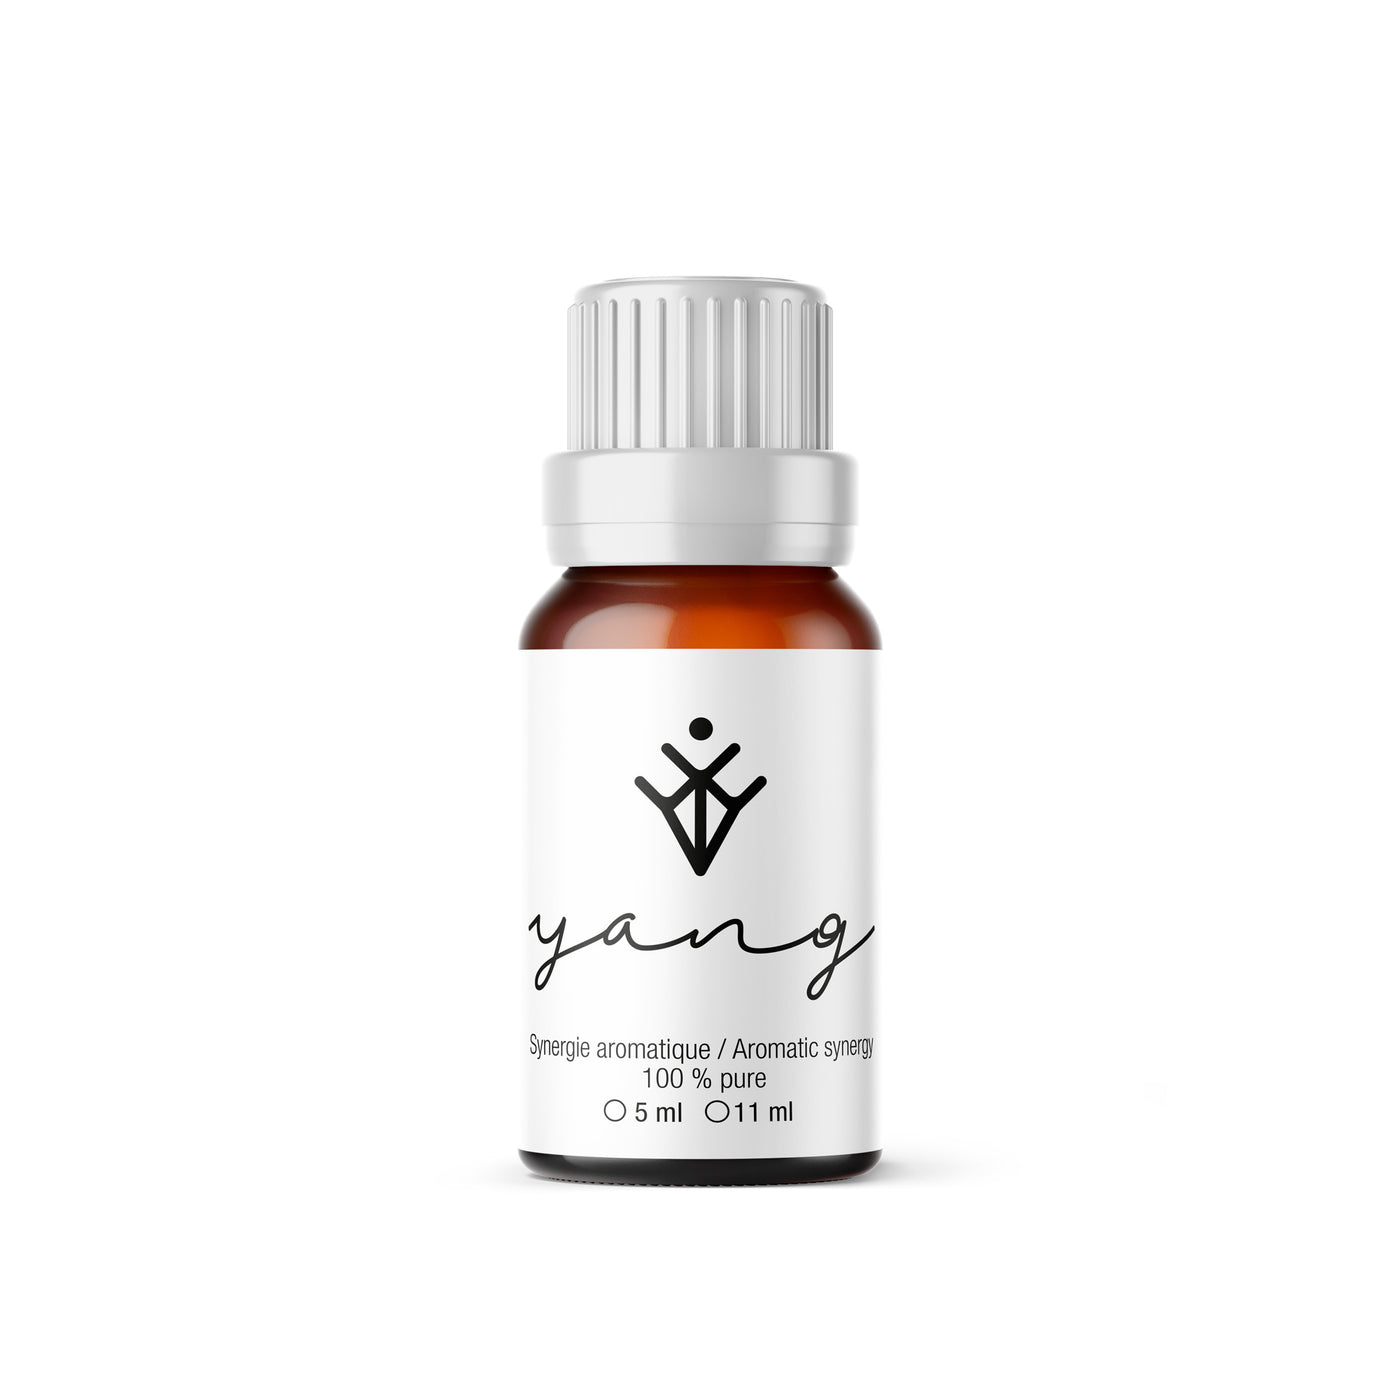 Yang - Synergie aromatique 100% pure